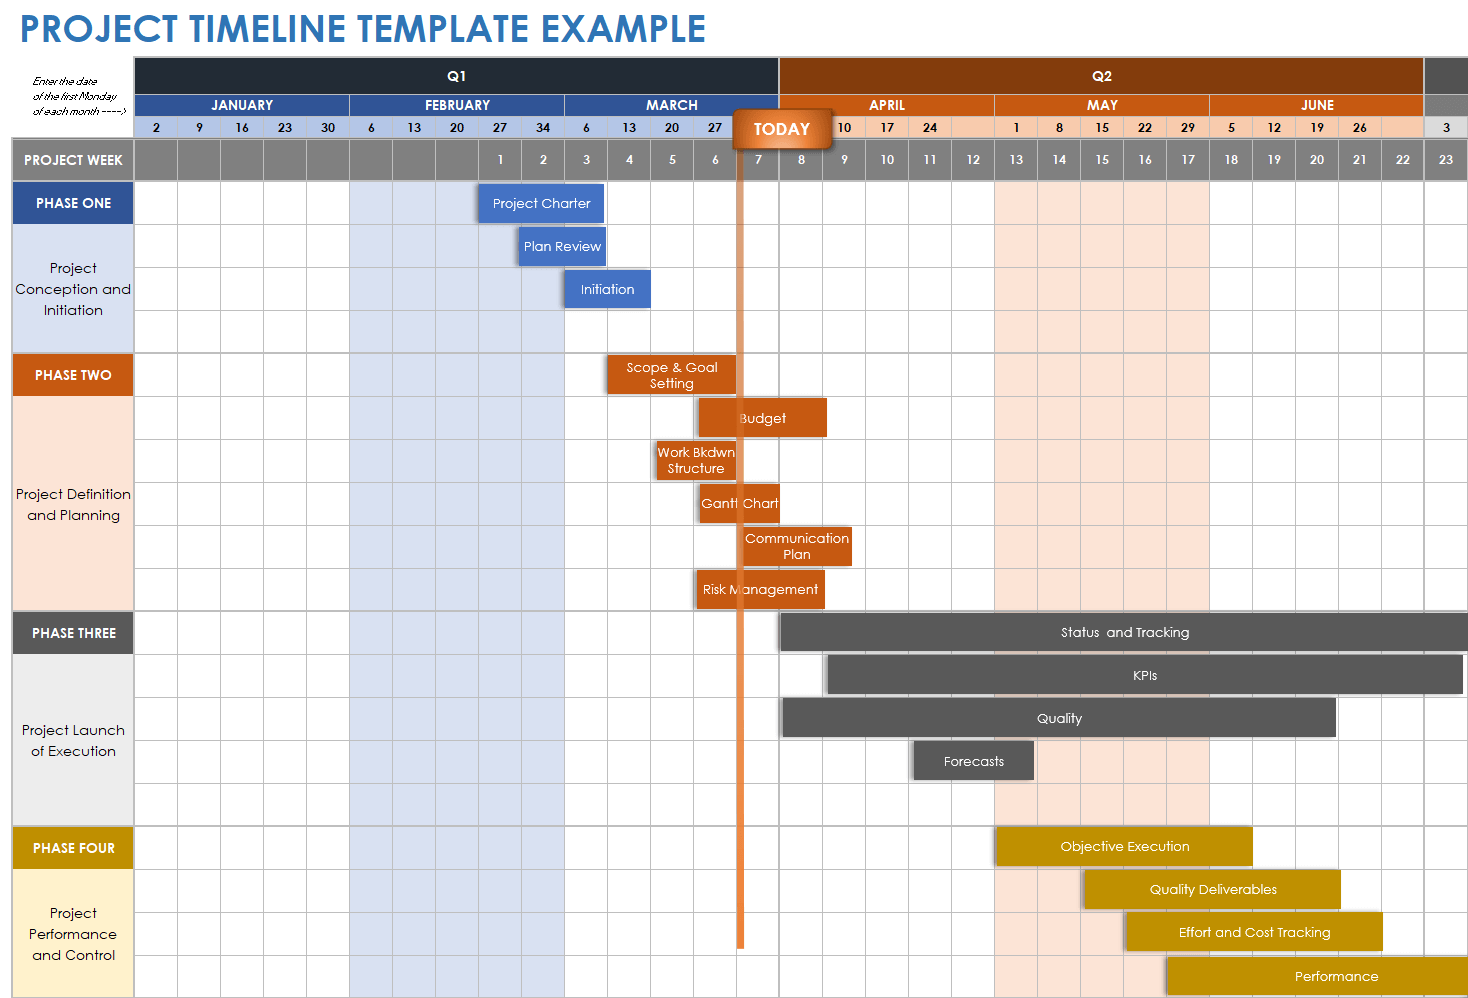 Example Project Timeline Template